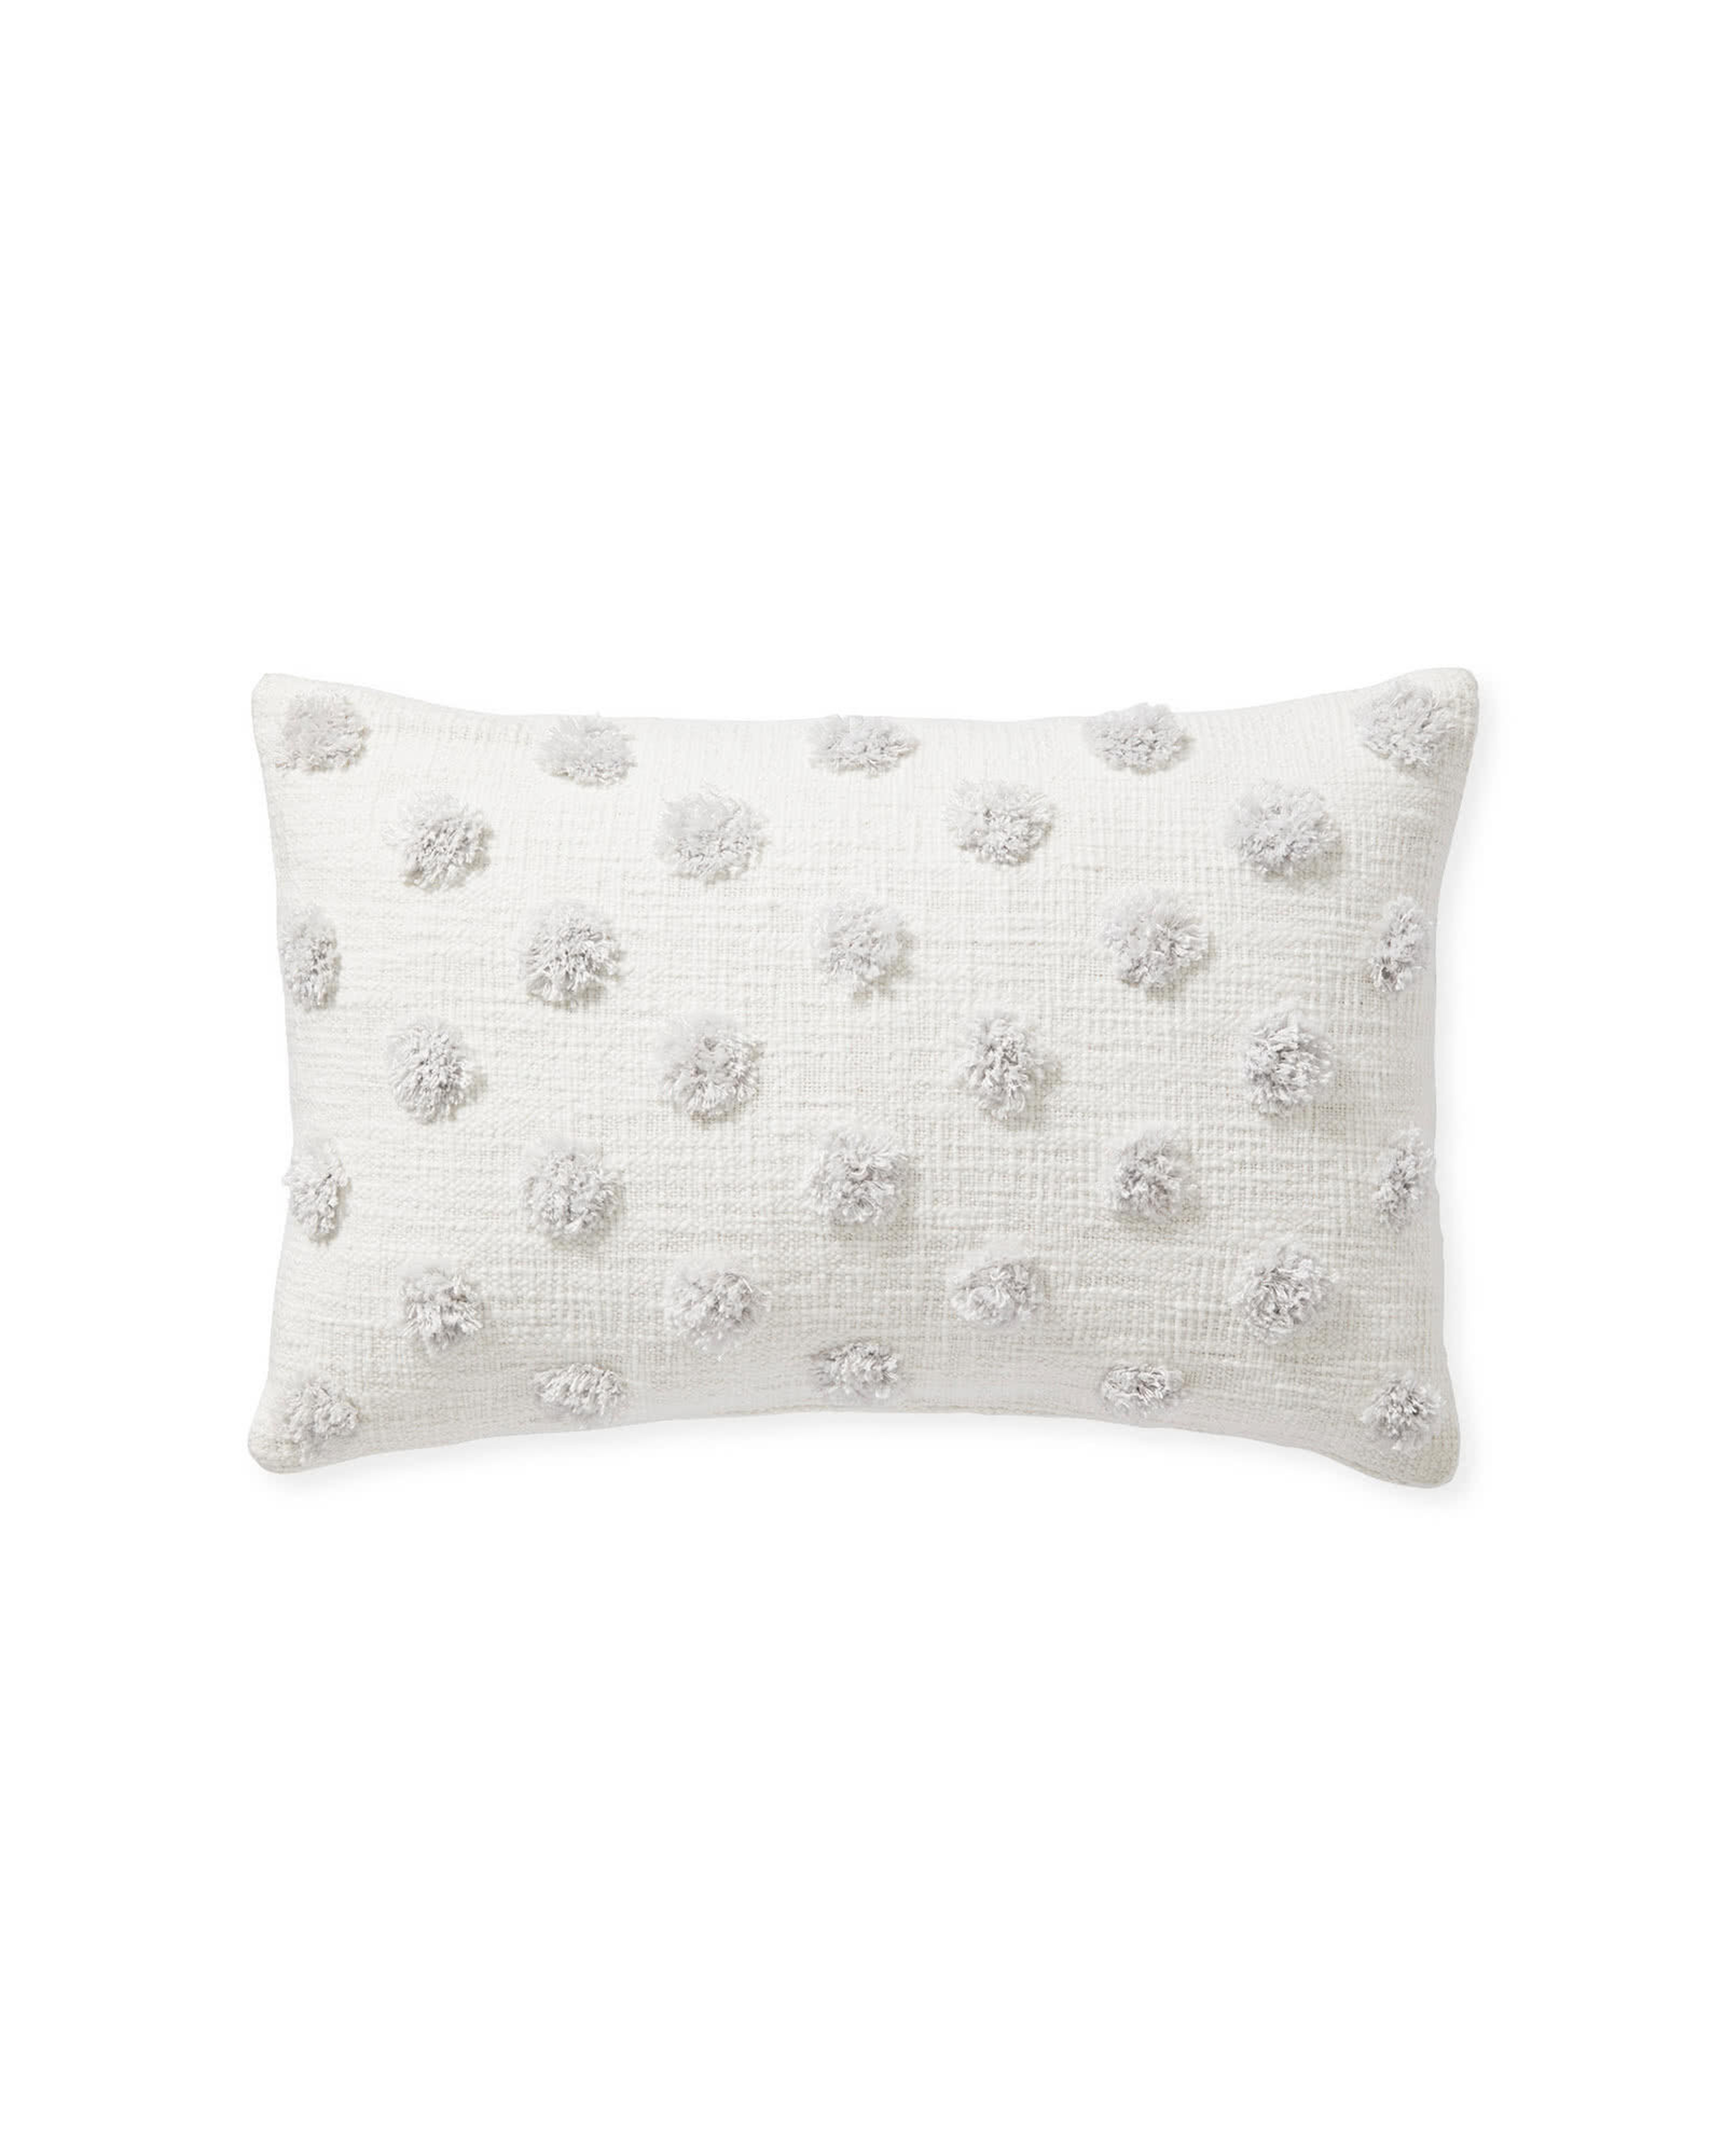 Willow Pillow Cover - Serena and Lily